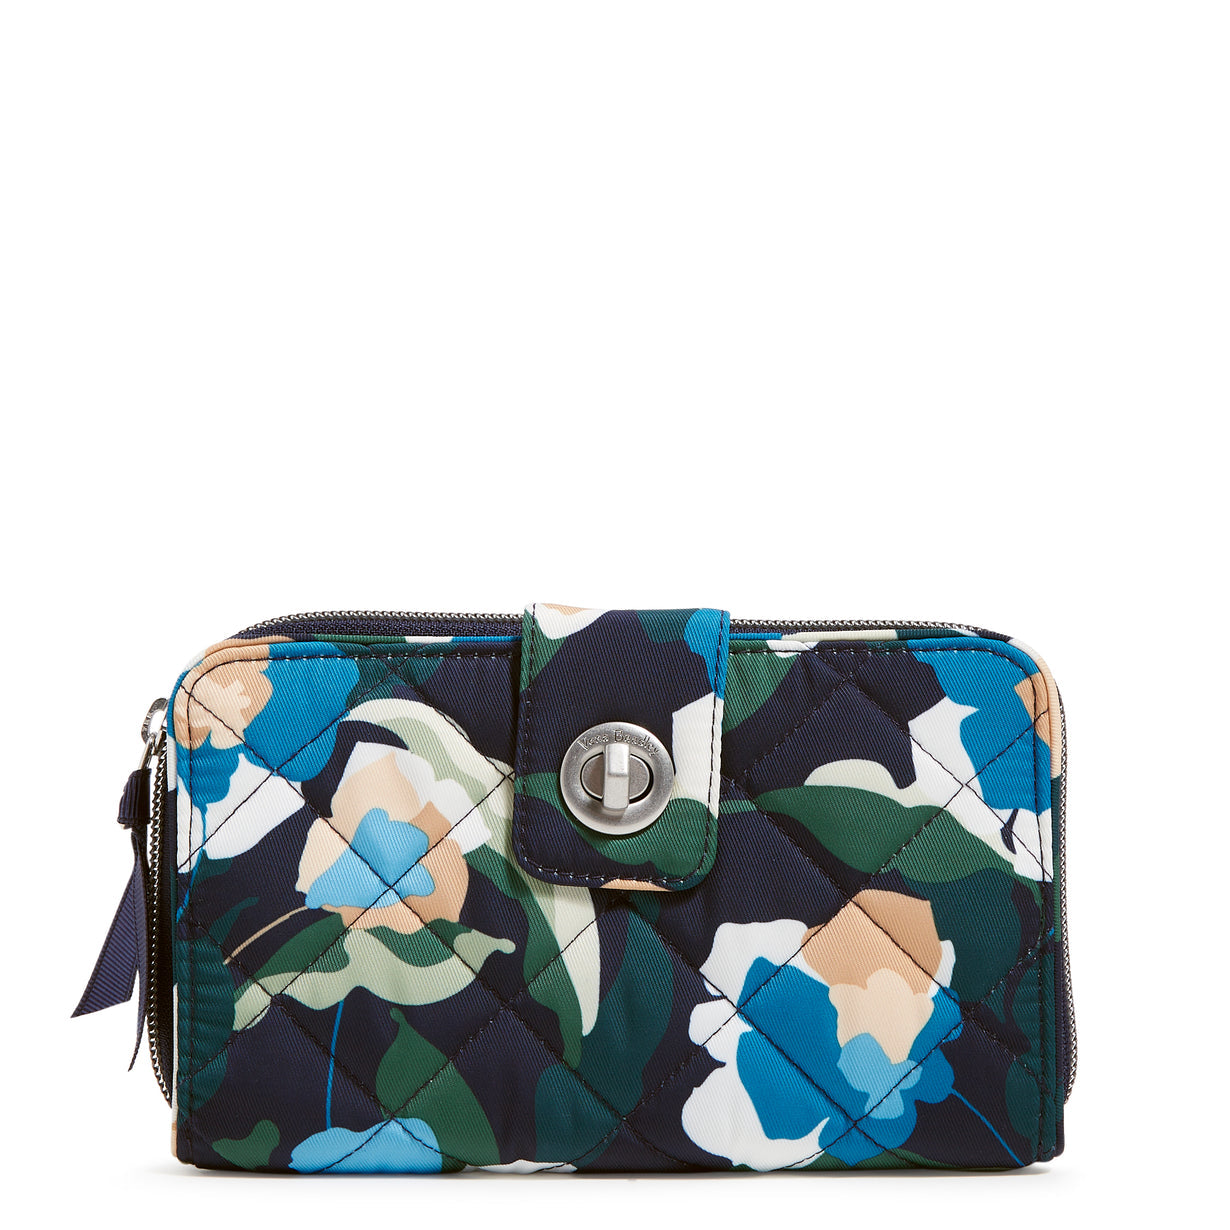 An RFID Turnlock Wallet from Vera Bradley. In their new Immersed Blooms performance twill fabric.